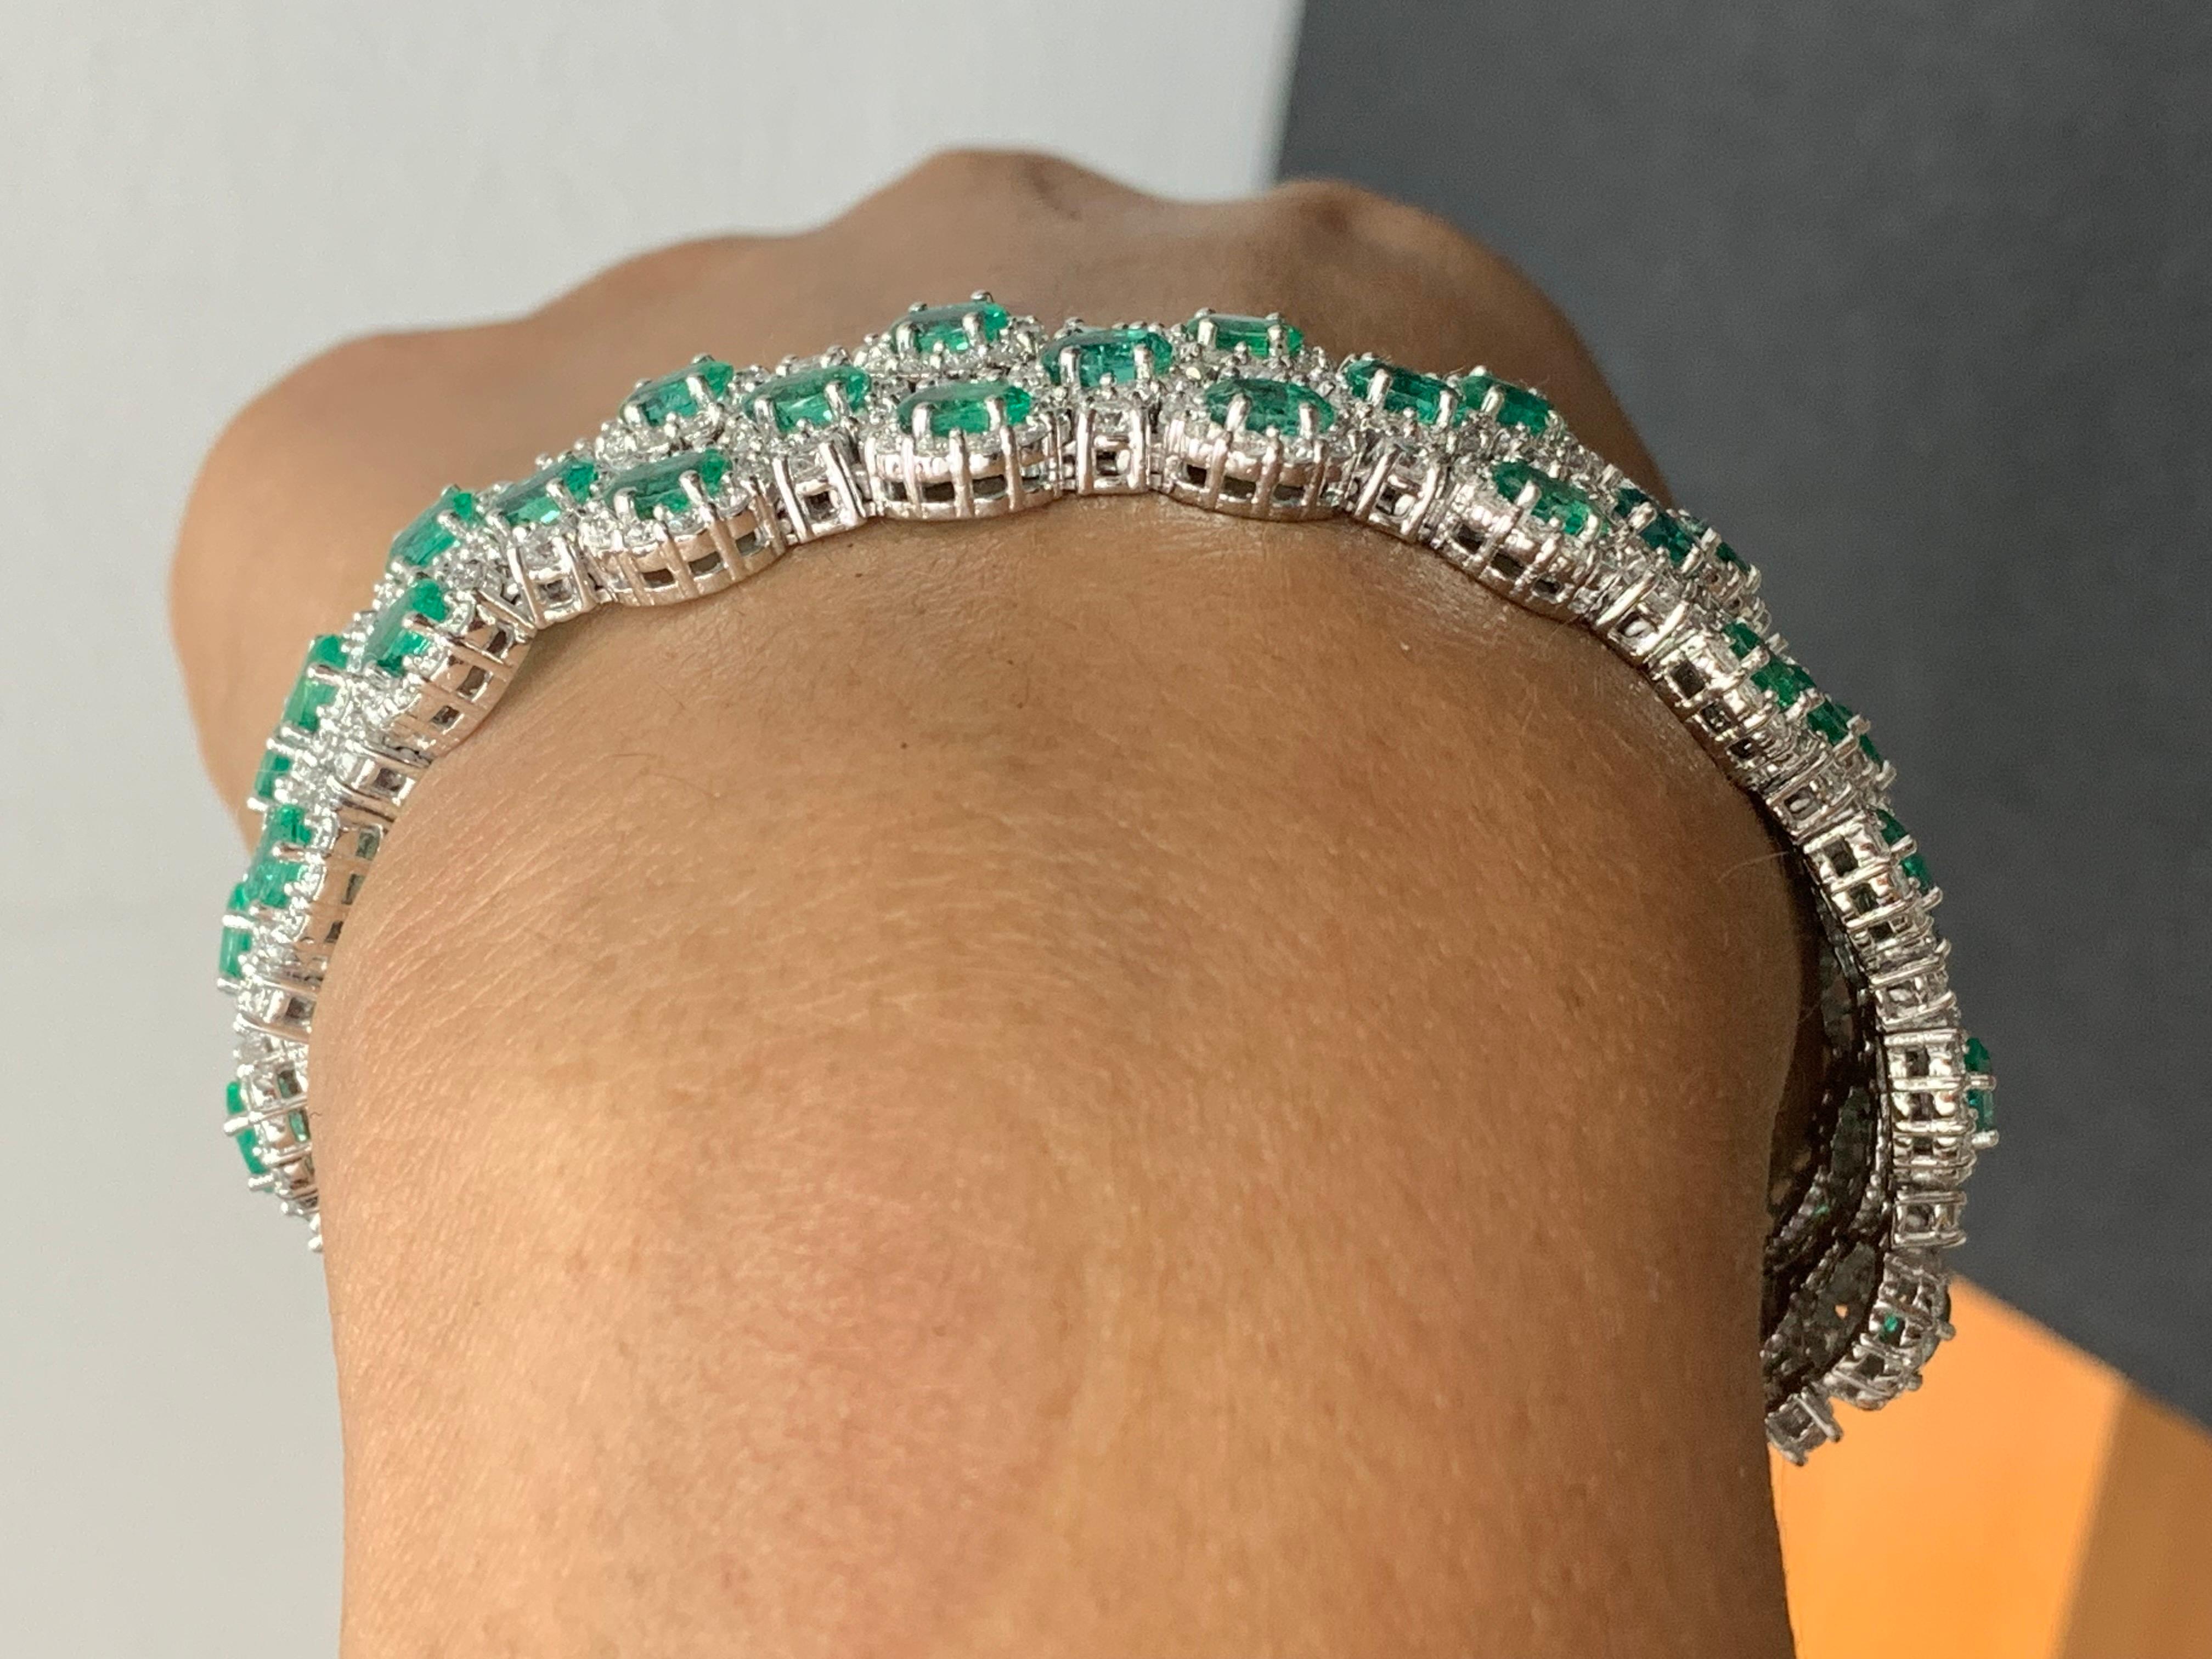 10.95 Carat Oval Cut Emerald and Diamond 3 Row Bracelet in 14K White Gold For Sale 2